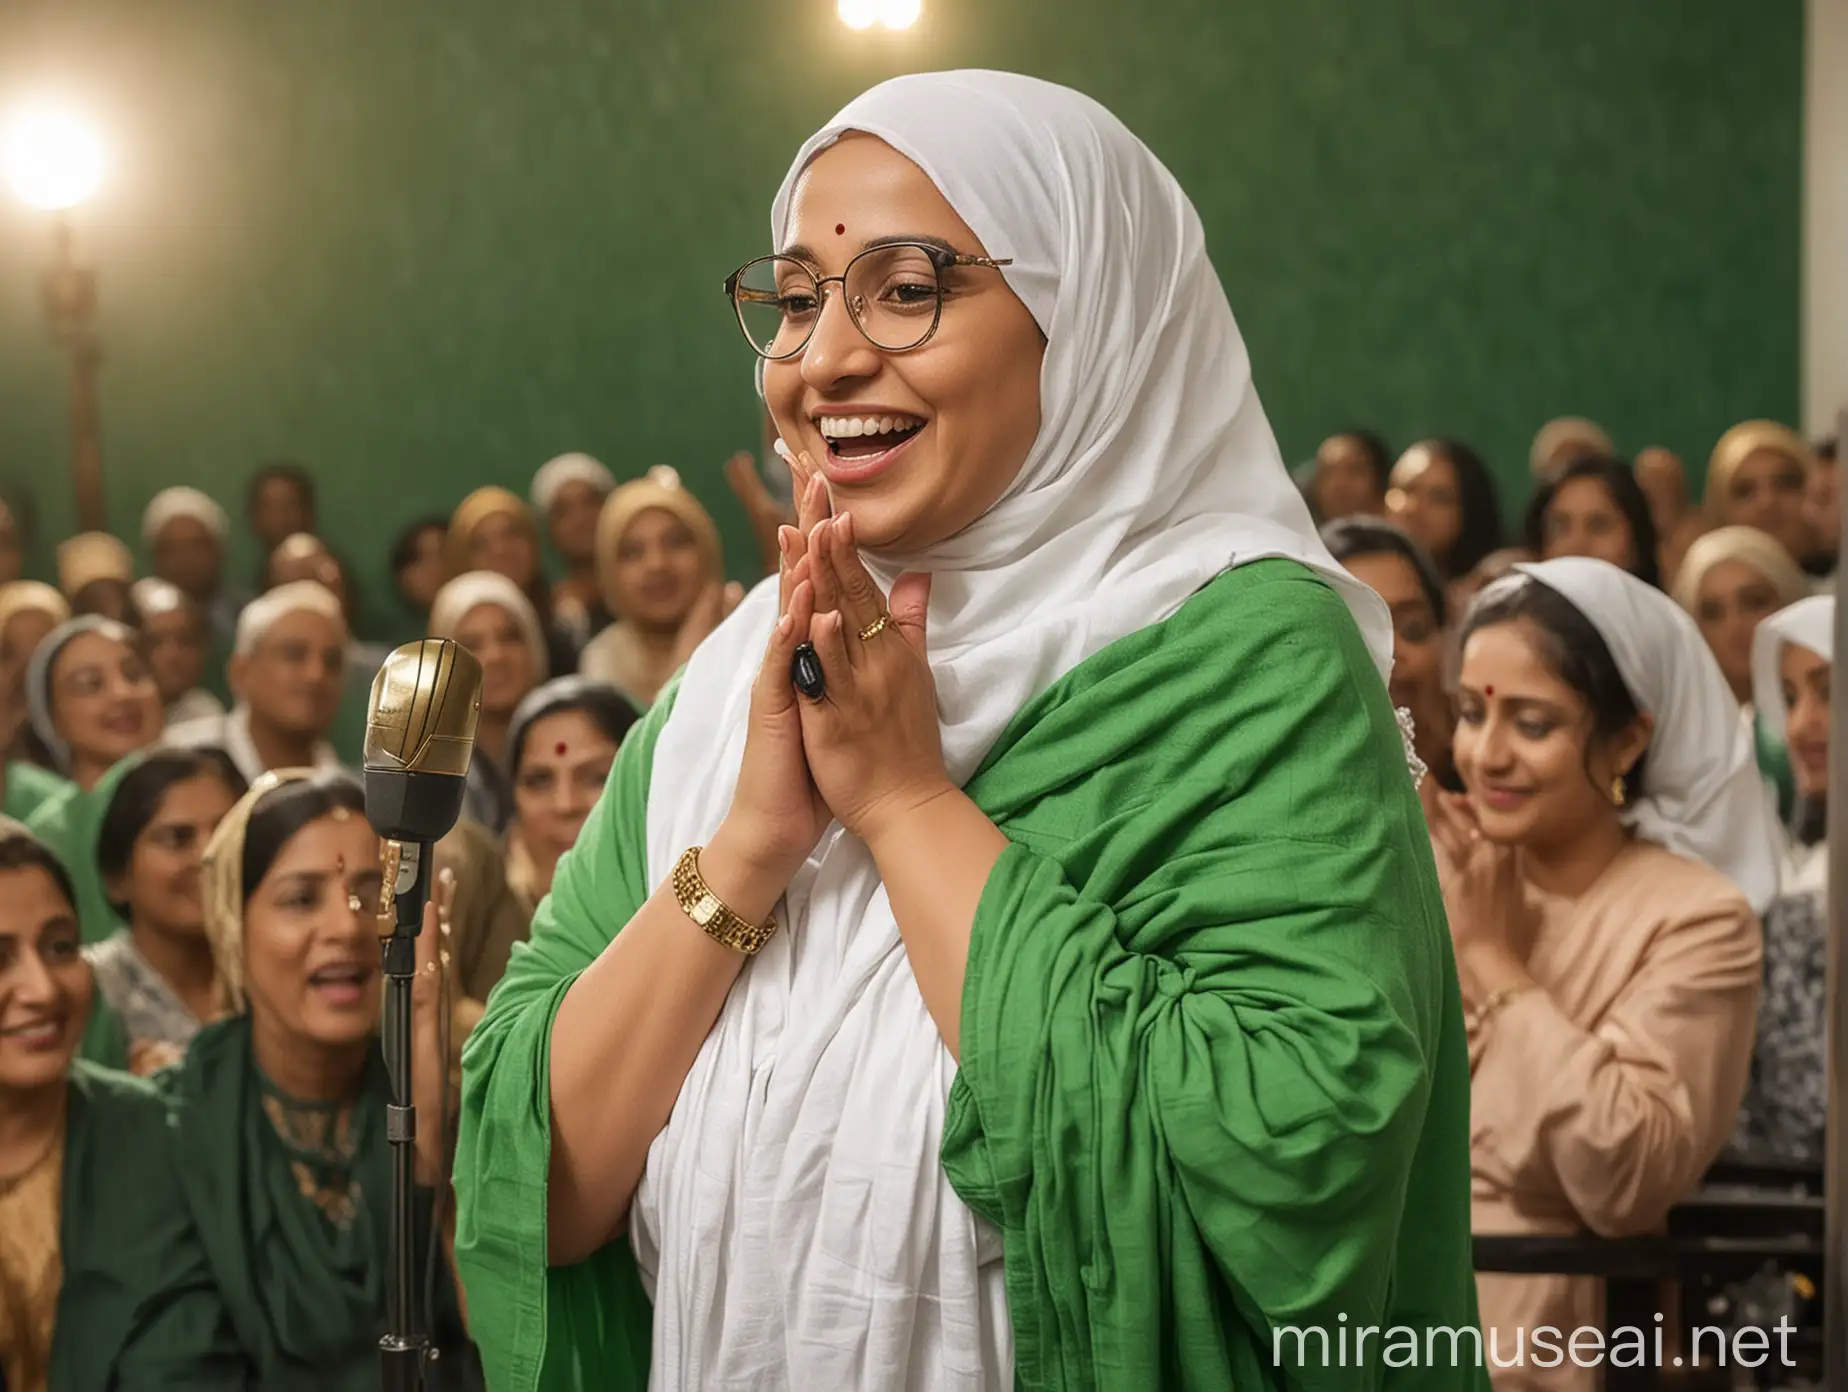 Mature Indian Woman Giving Dynamic Speech in Green Bath Towel on Stage